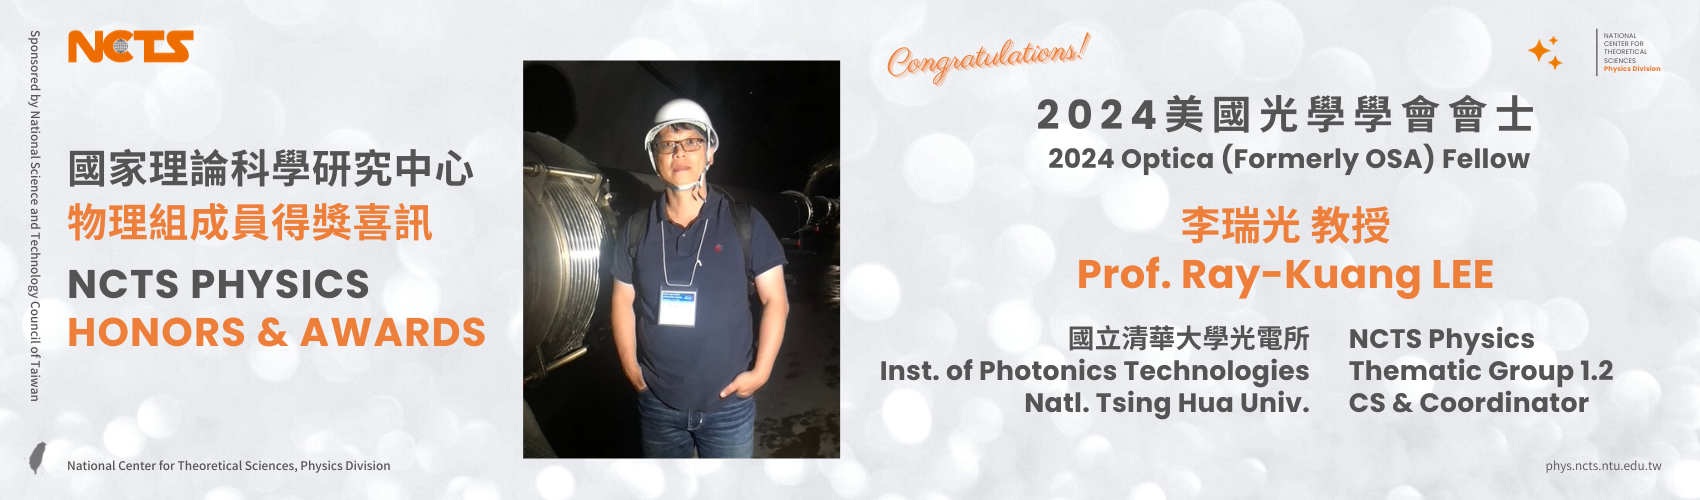 NCTS Congratulates Prof. Ray-Kuang Lee on Being Elected as 2024 Optica Fellow